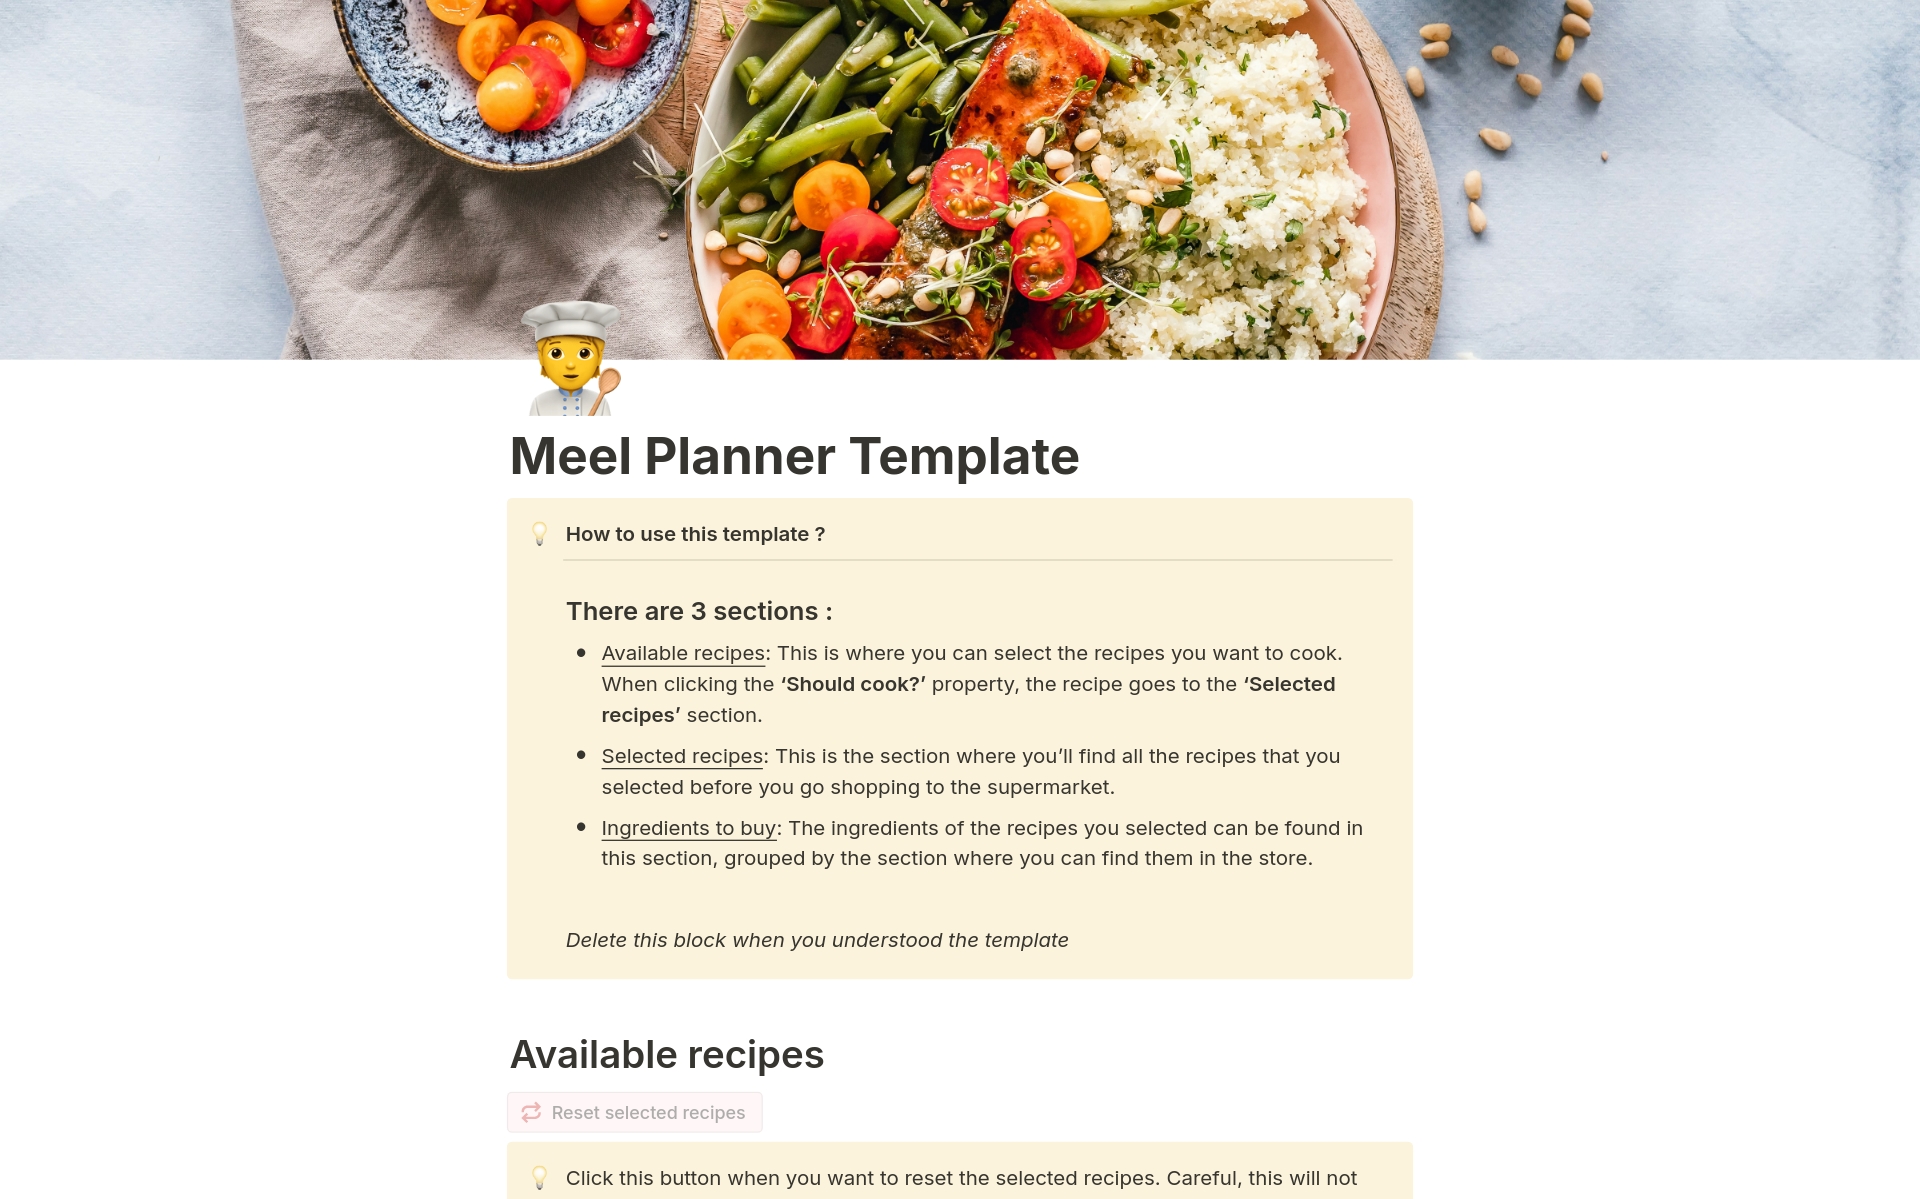 A template preview for Meel Planner